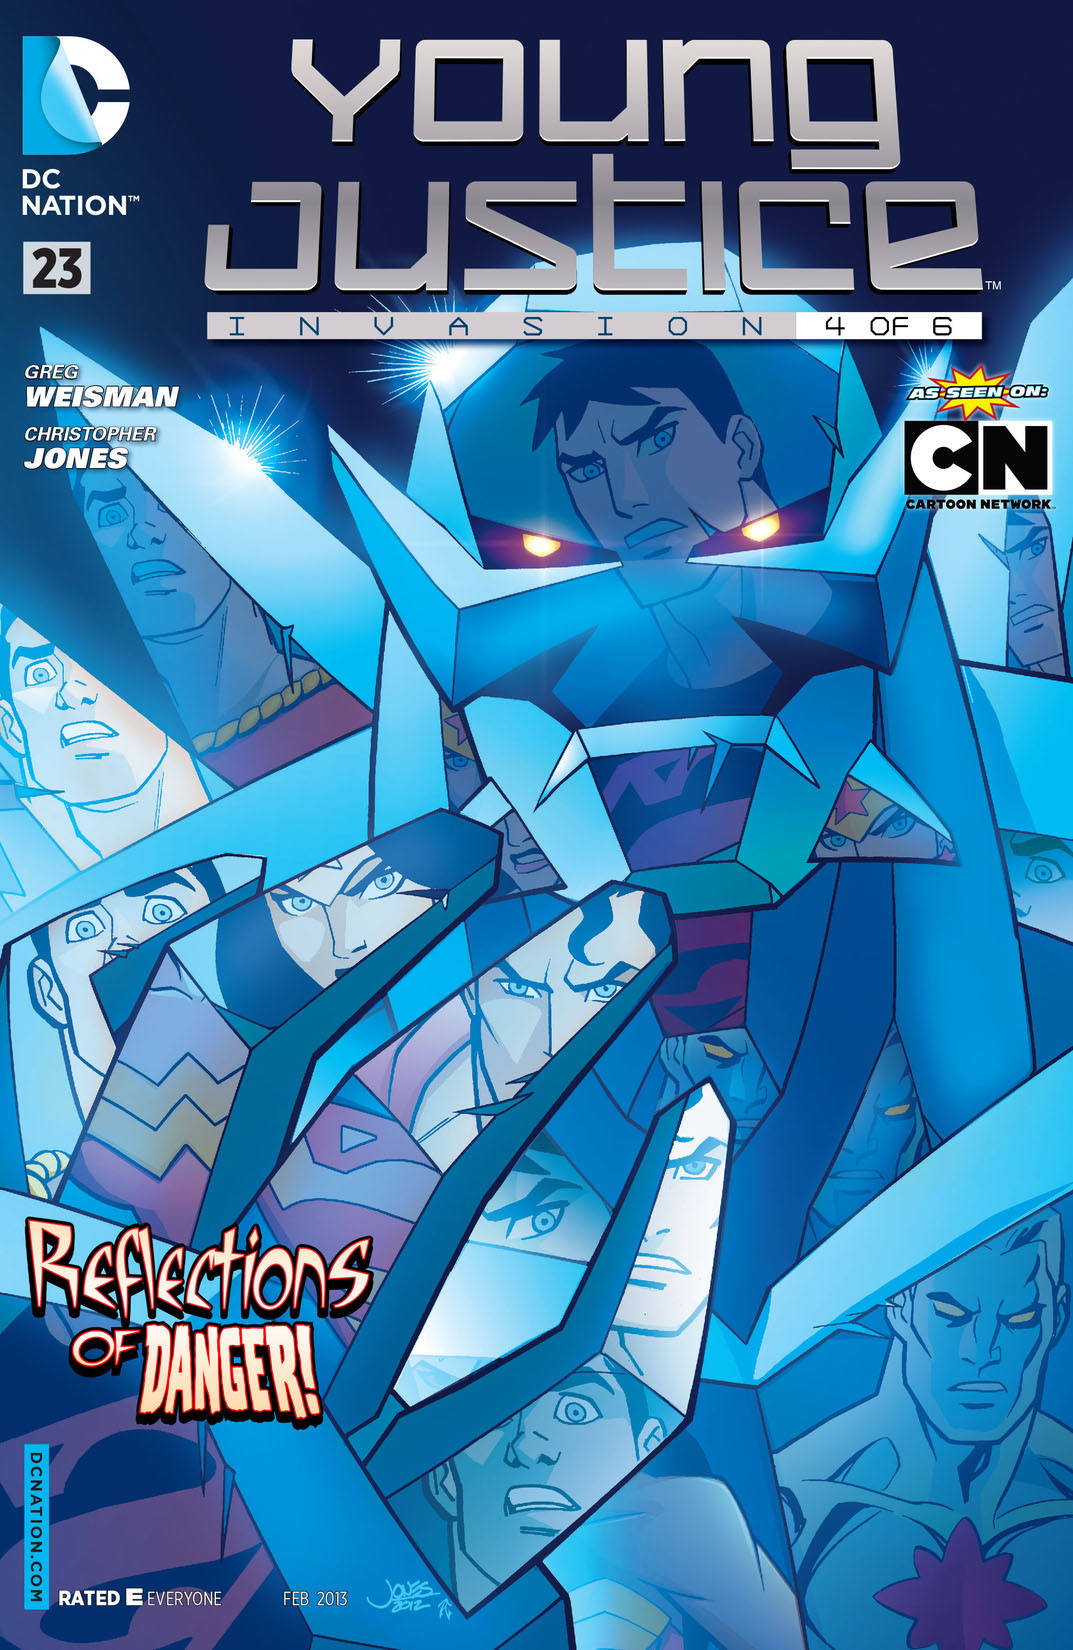 Young Justice (2011-2013) #23 preview images